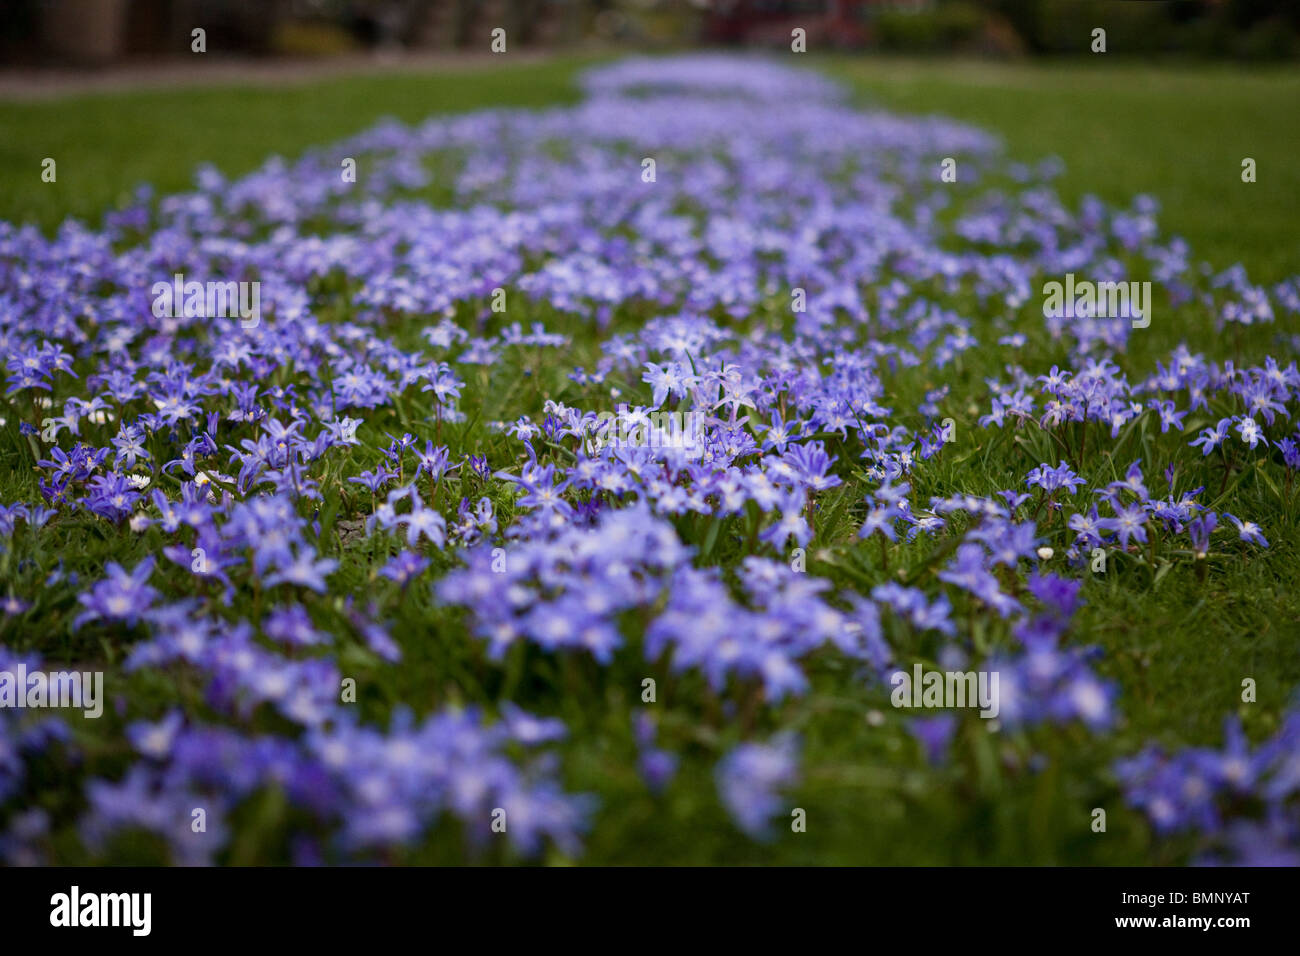 Carpet of purple squill flowers growing in green grass Stock Photo